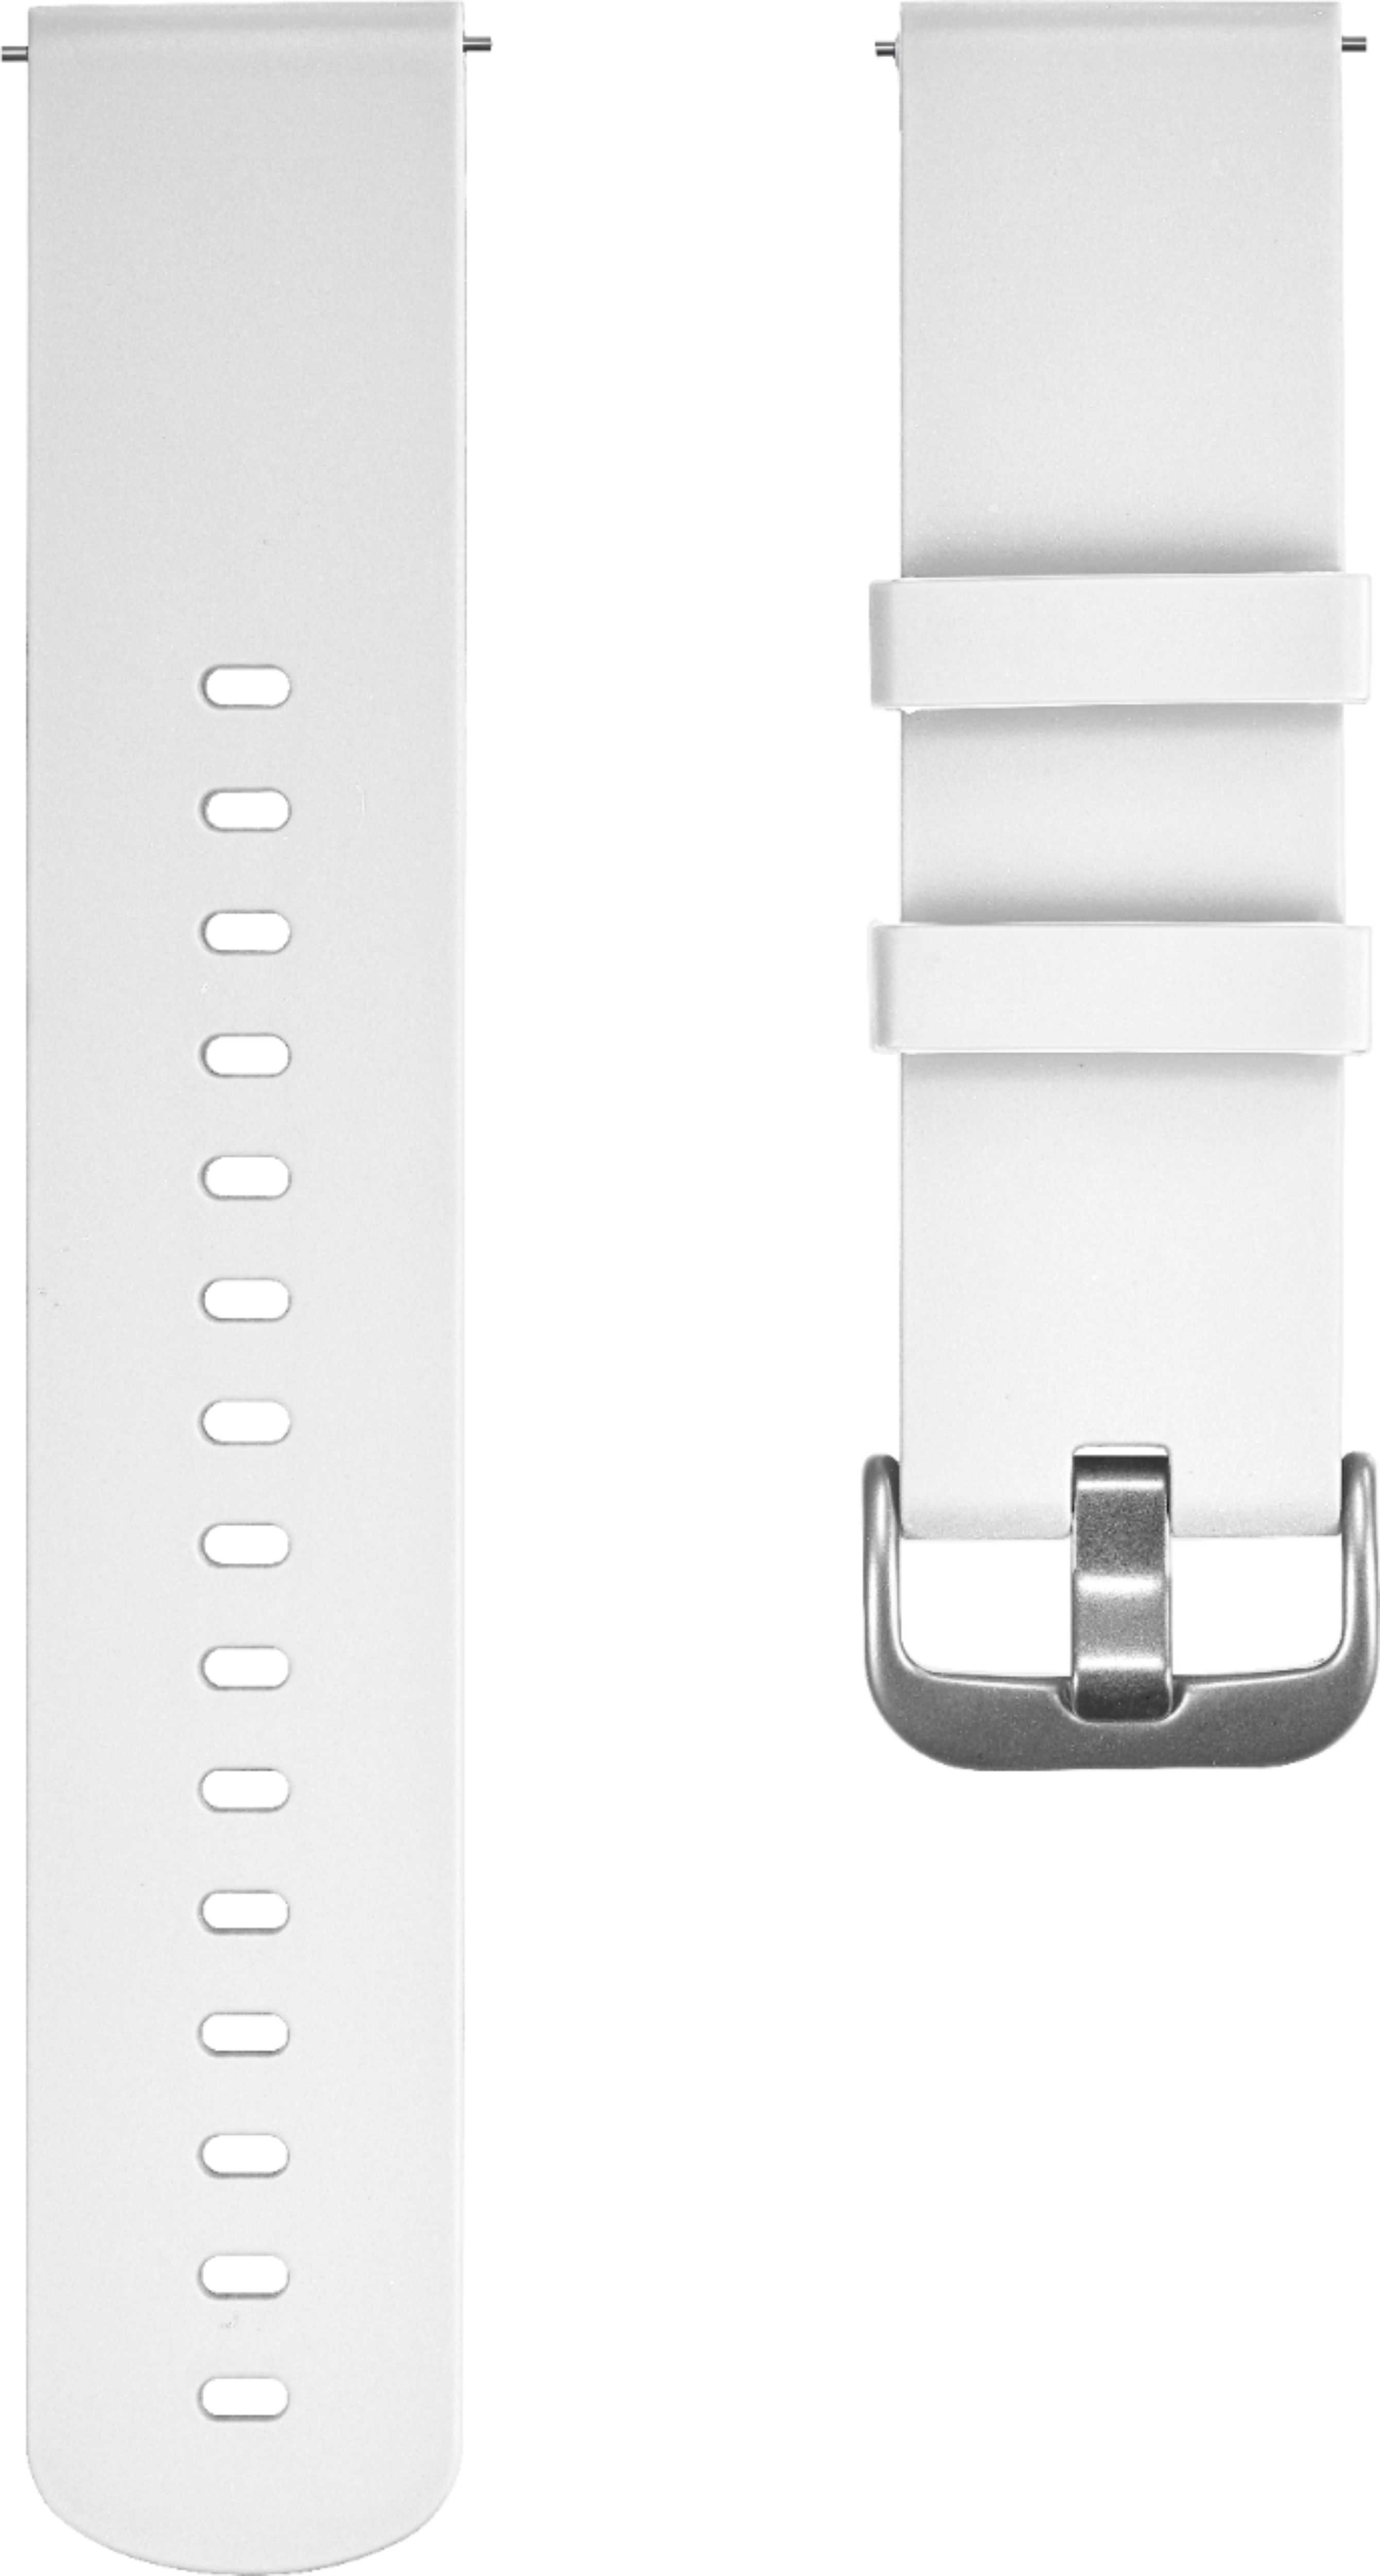 Best Buy: Modal™ Silicone Watch Band for Galaxy Watch3 (45mm) and